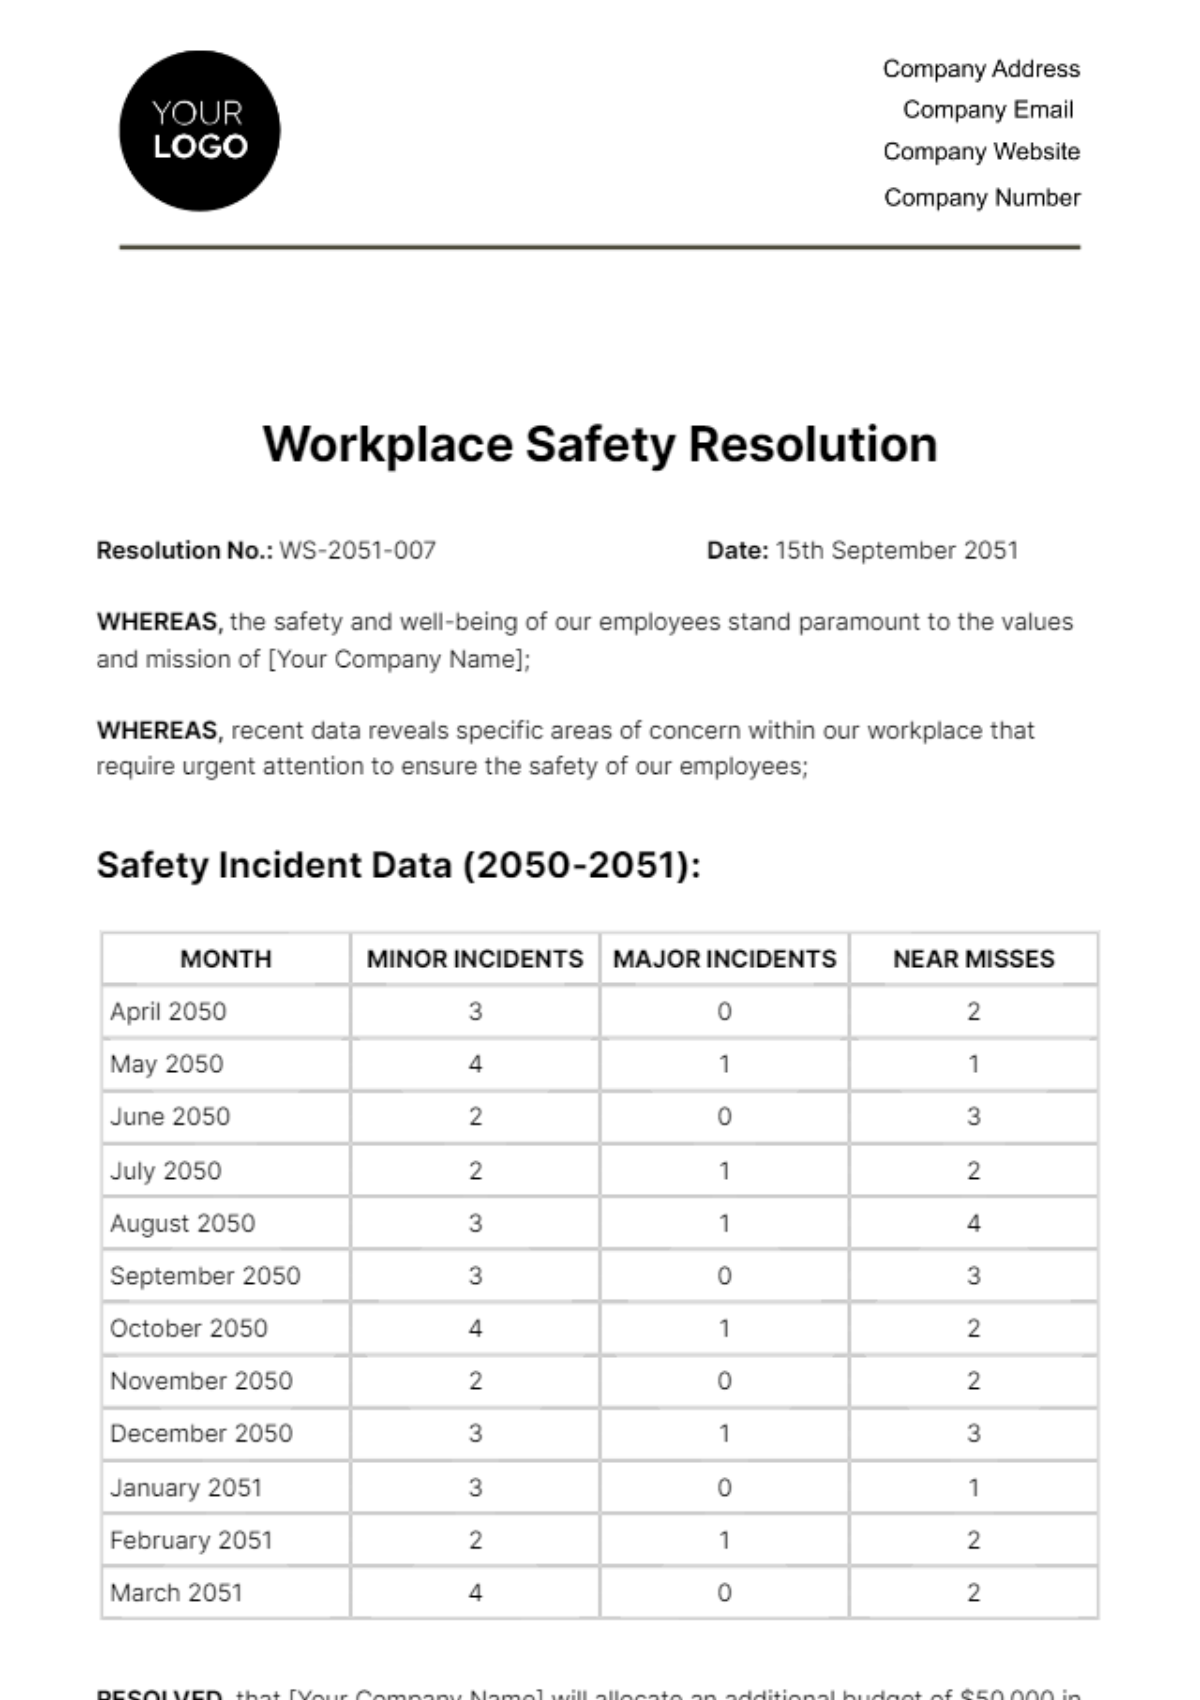 Free Workplace Safety Resolution HR Template